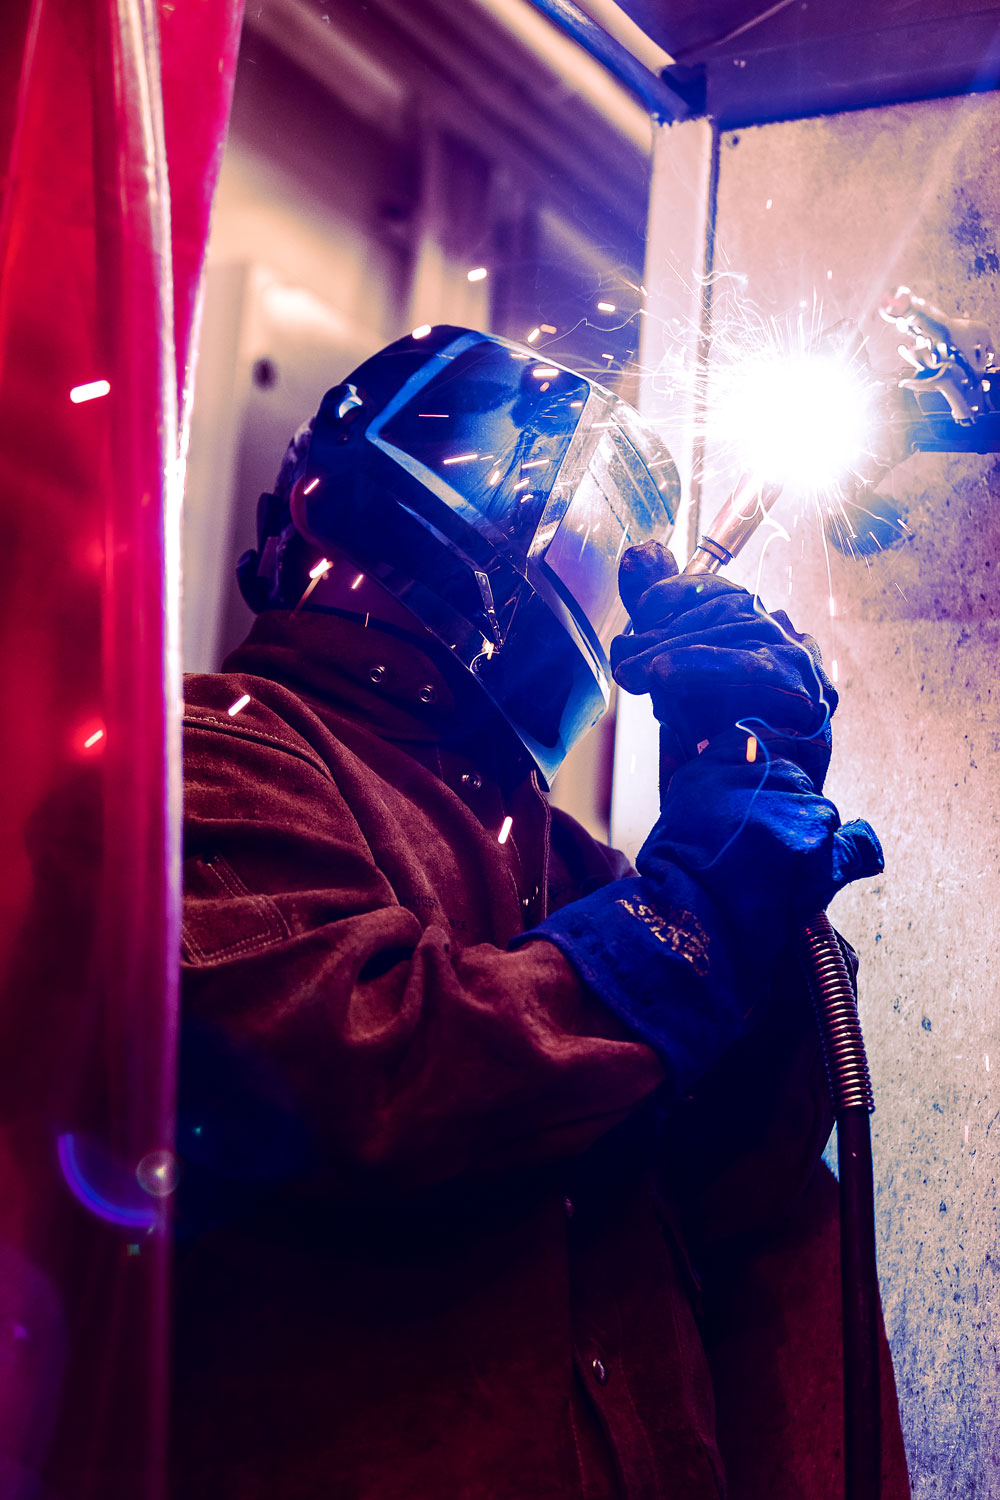 Photograph from the Welding Program, a day cohort student doing an overhead weld with flex core (FCAW) process.